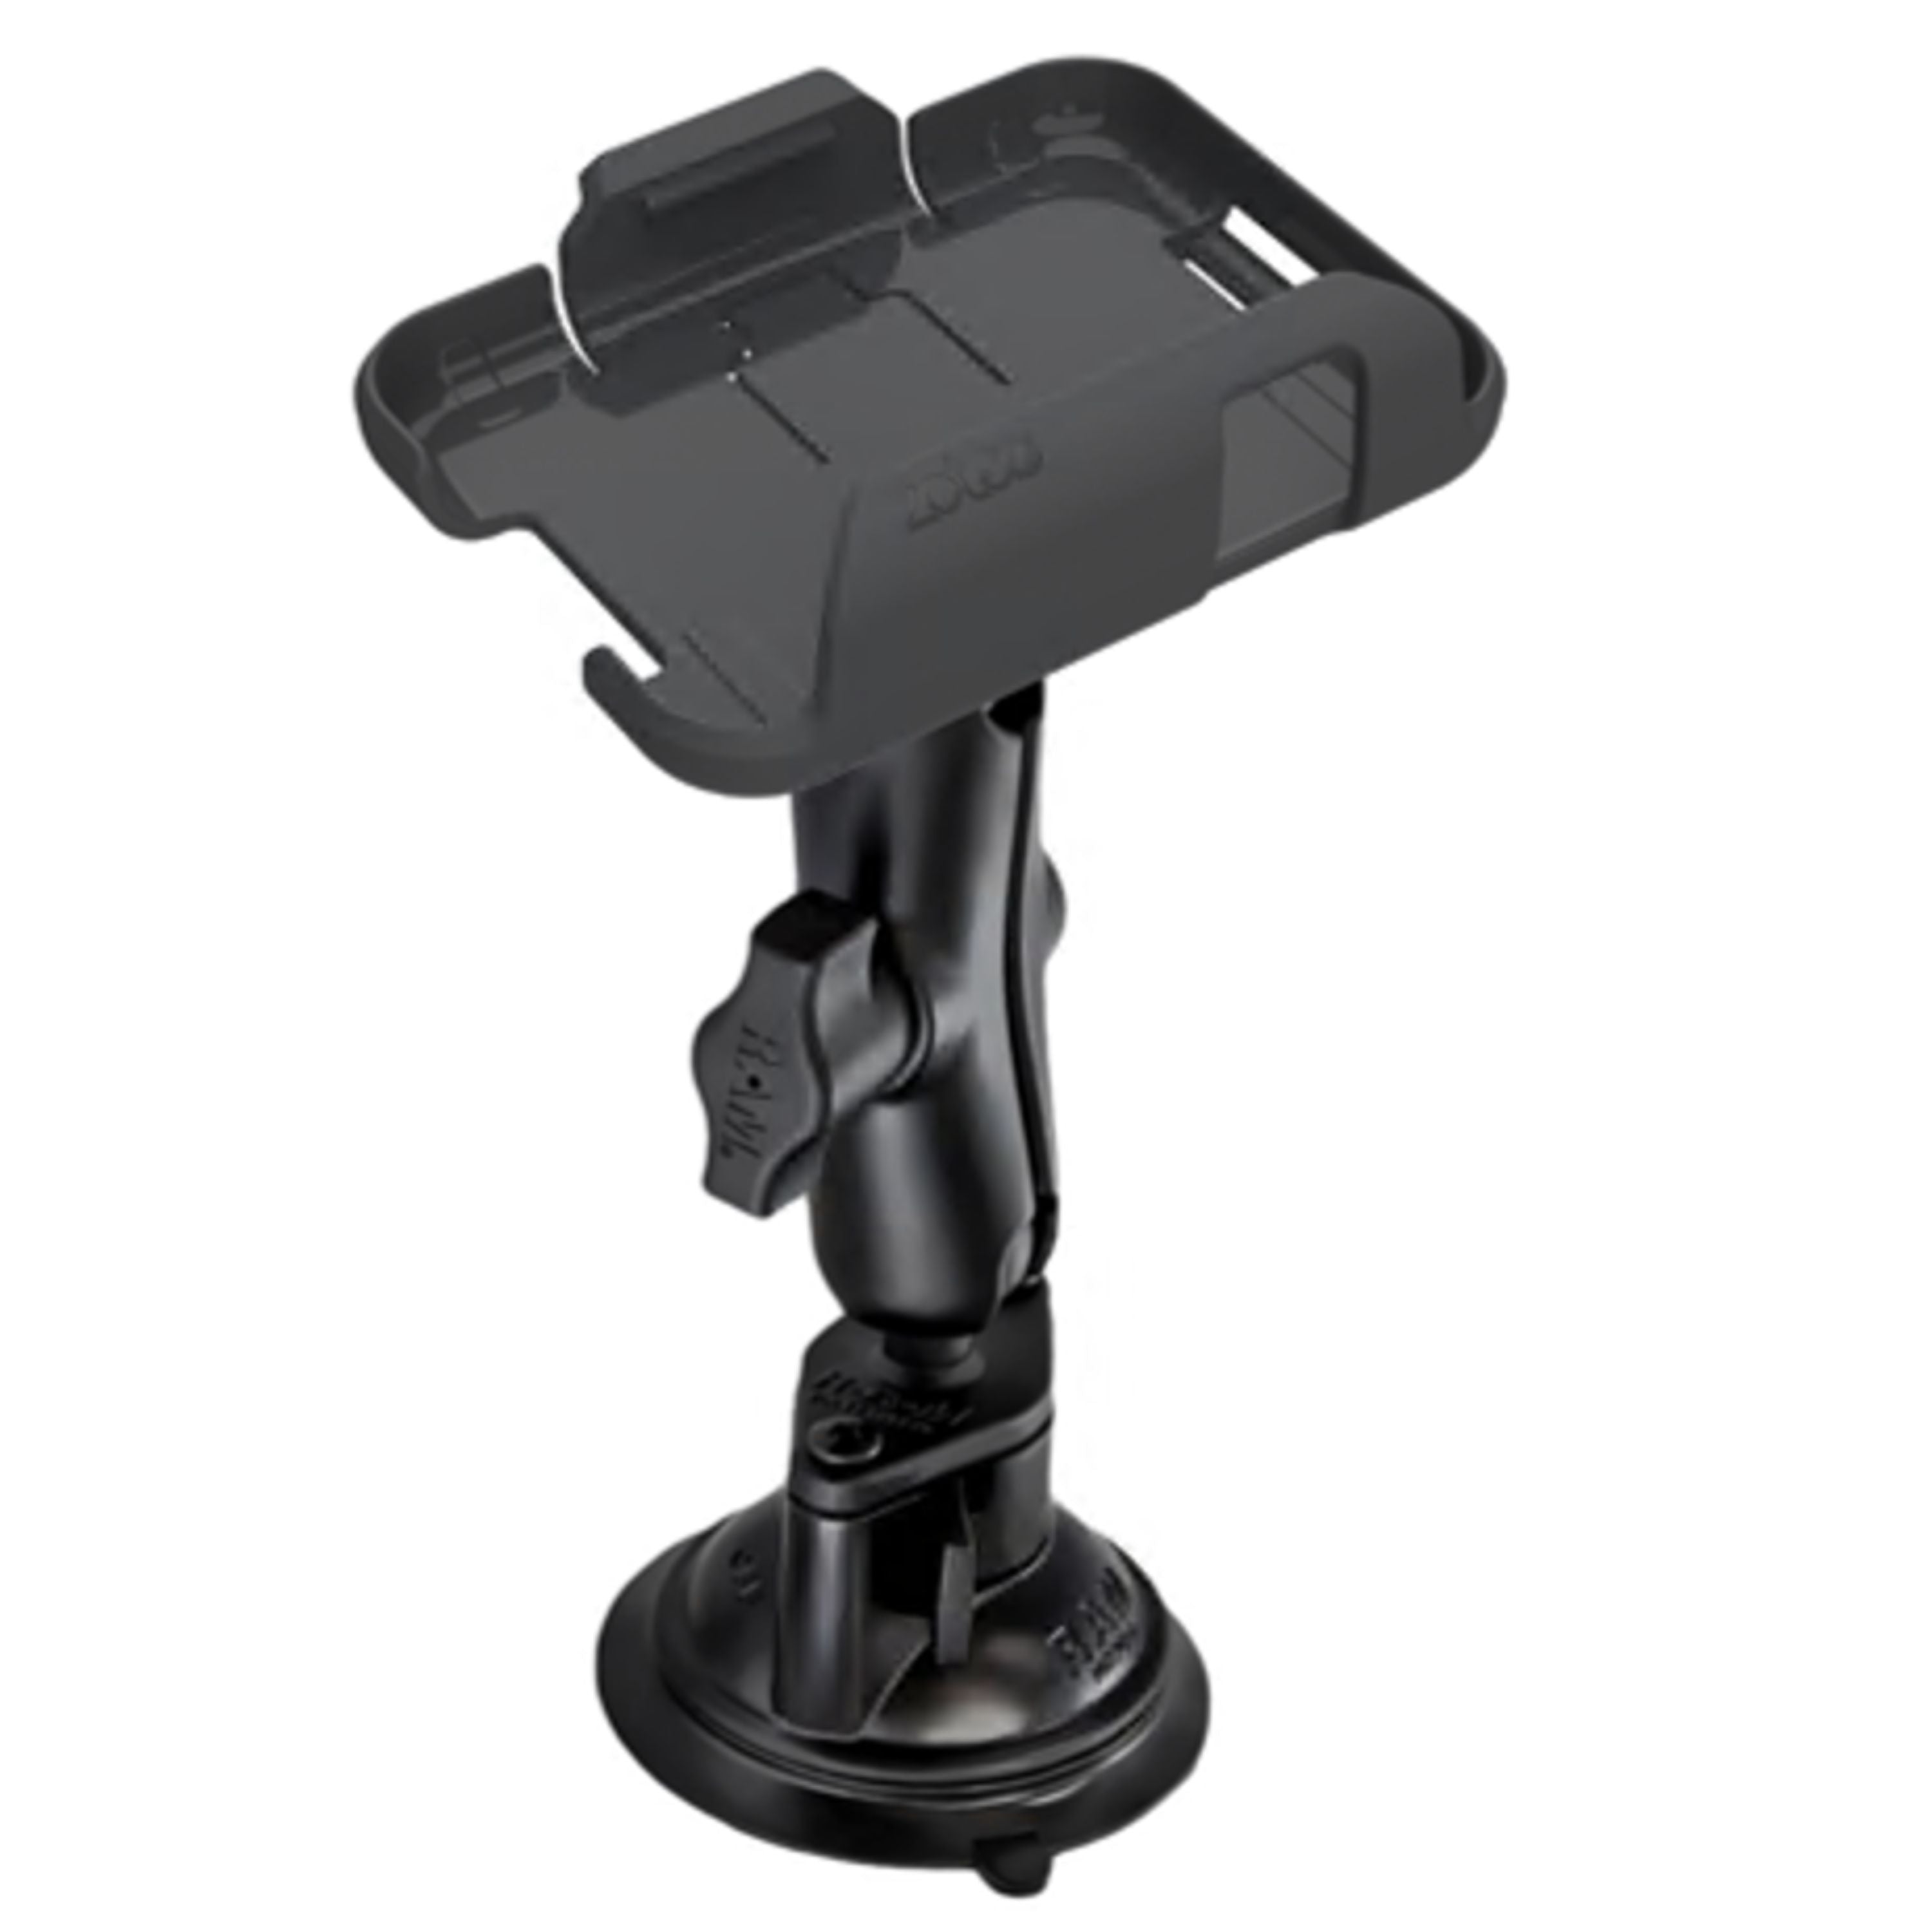 Support universel à ventouse pour Zoleo||Zoleo universal mount with suction cup